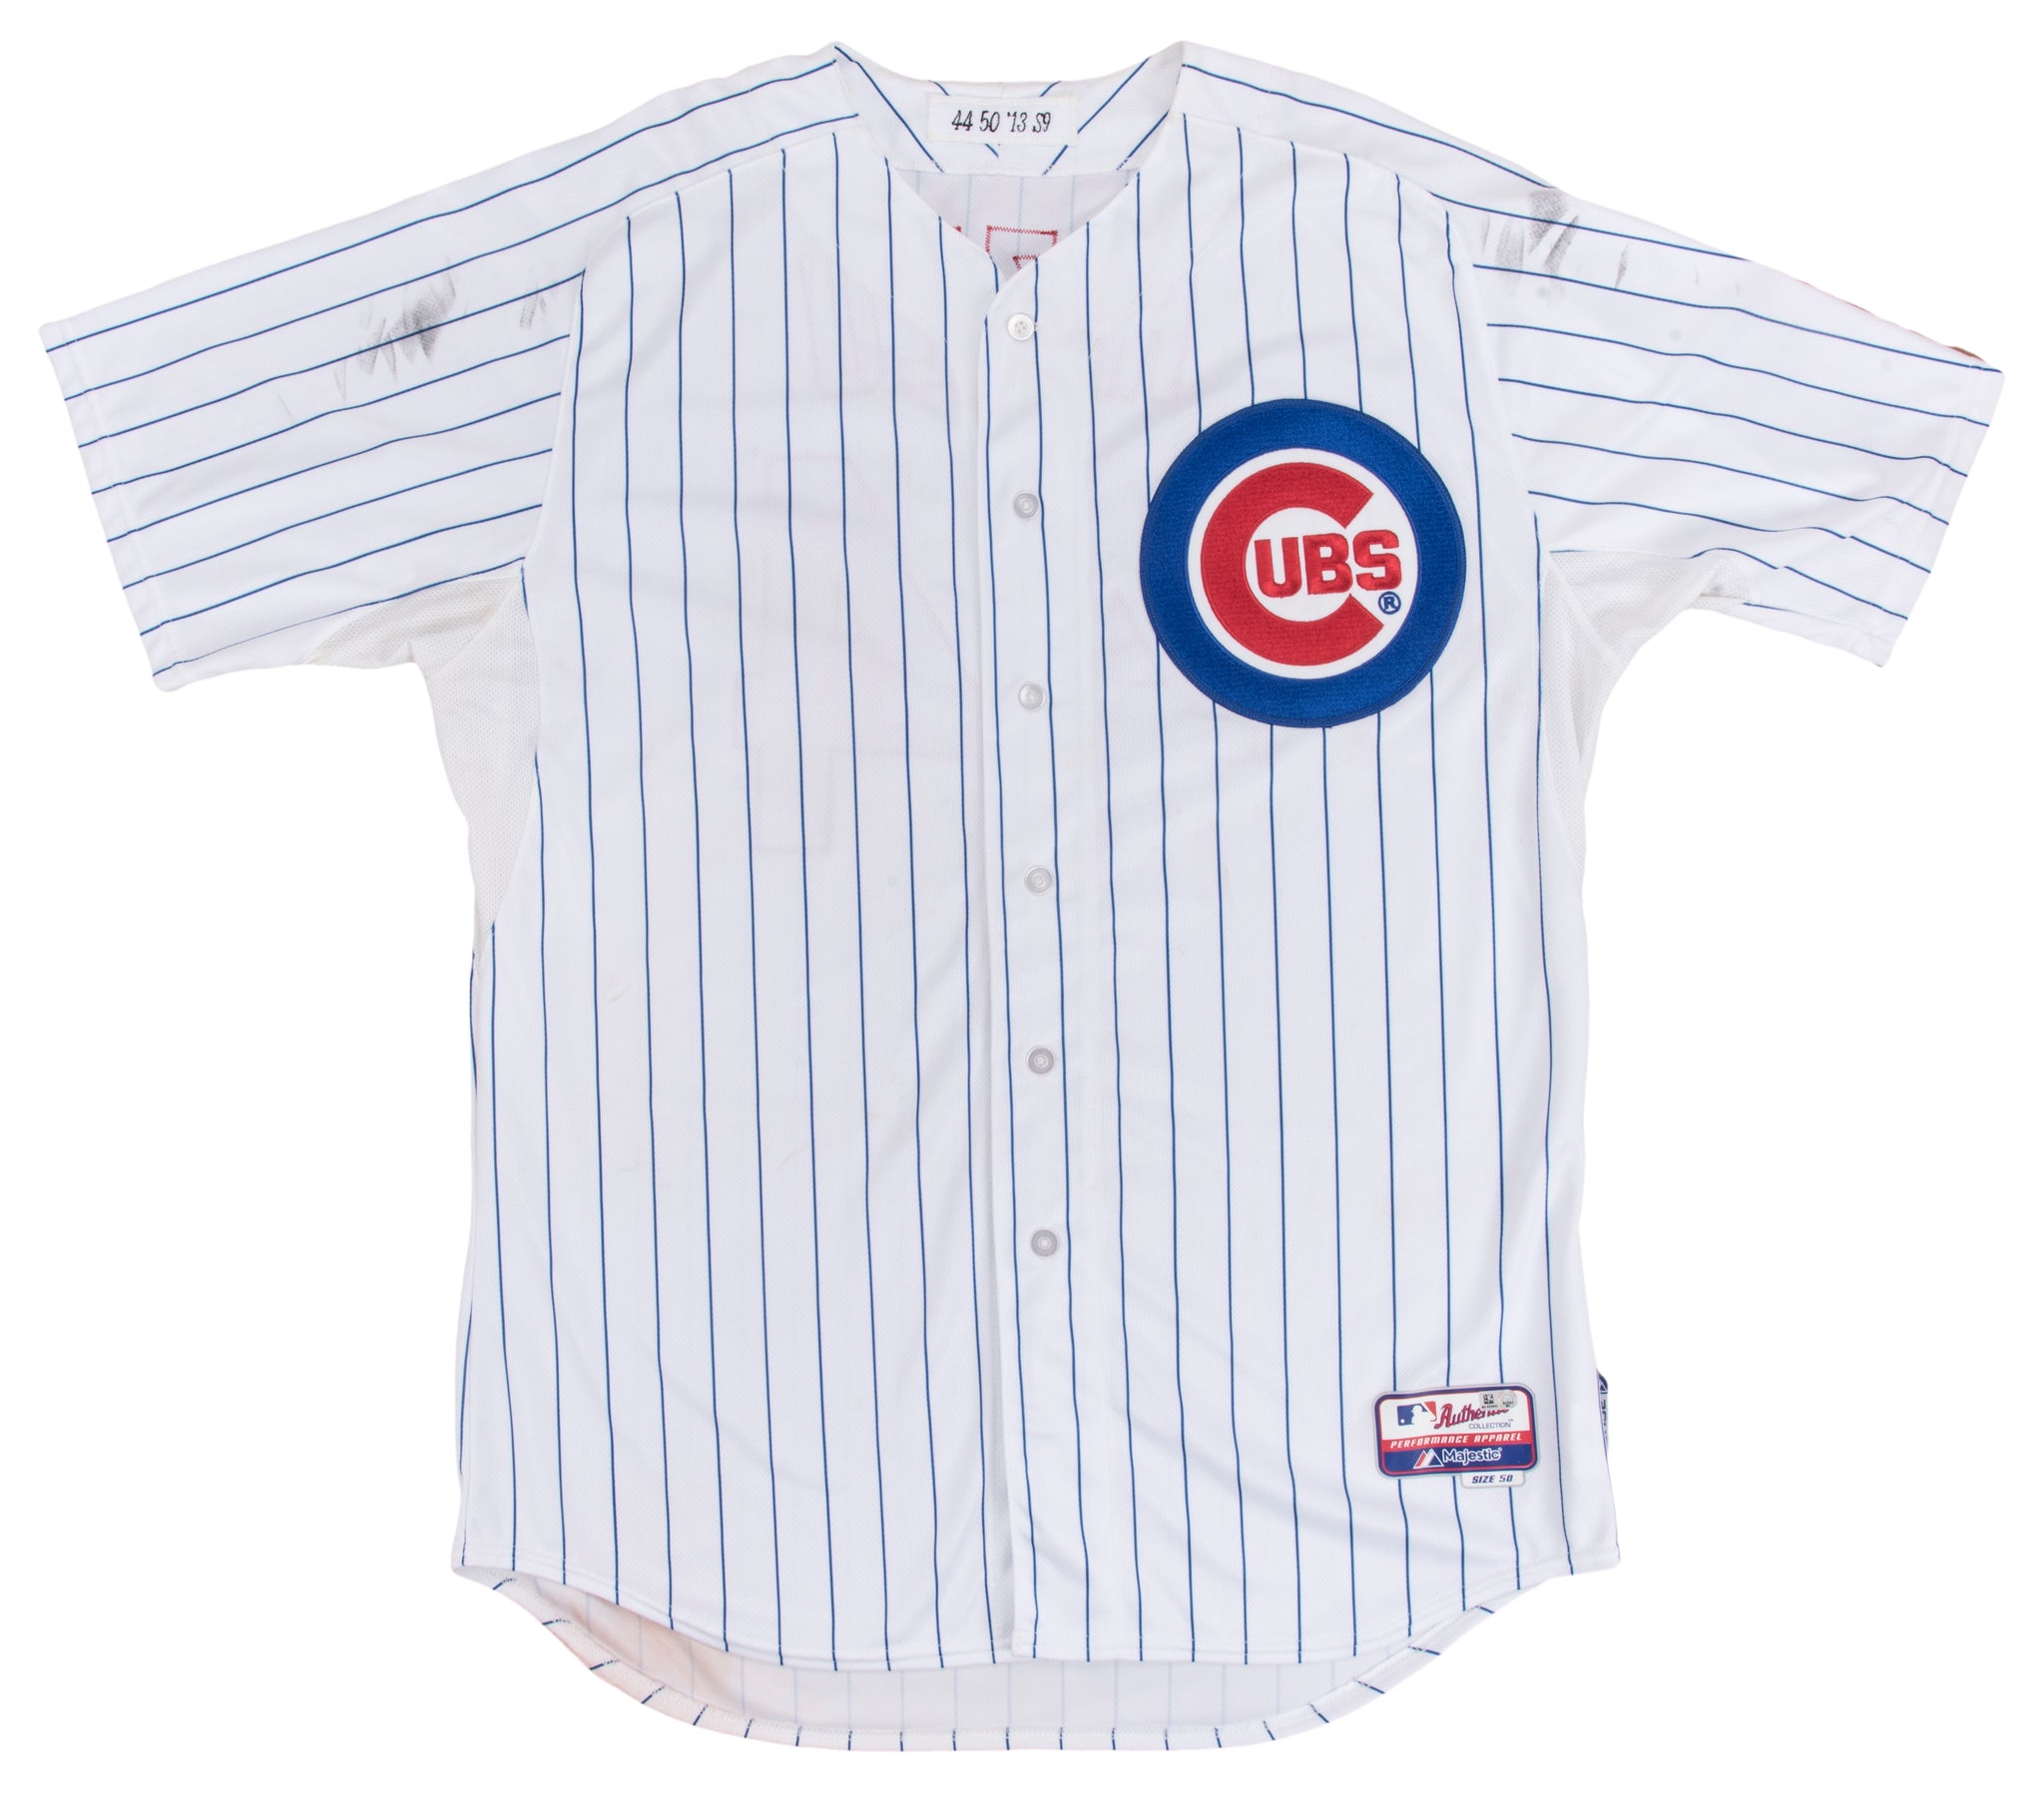 Anthony Rizzo World Series MLB Jerseys for sale